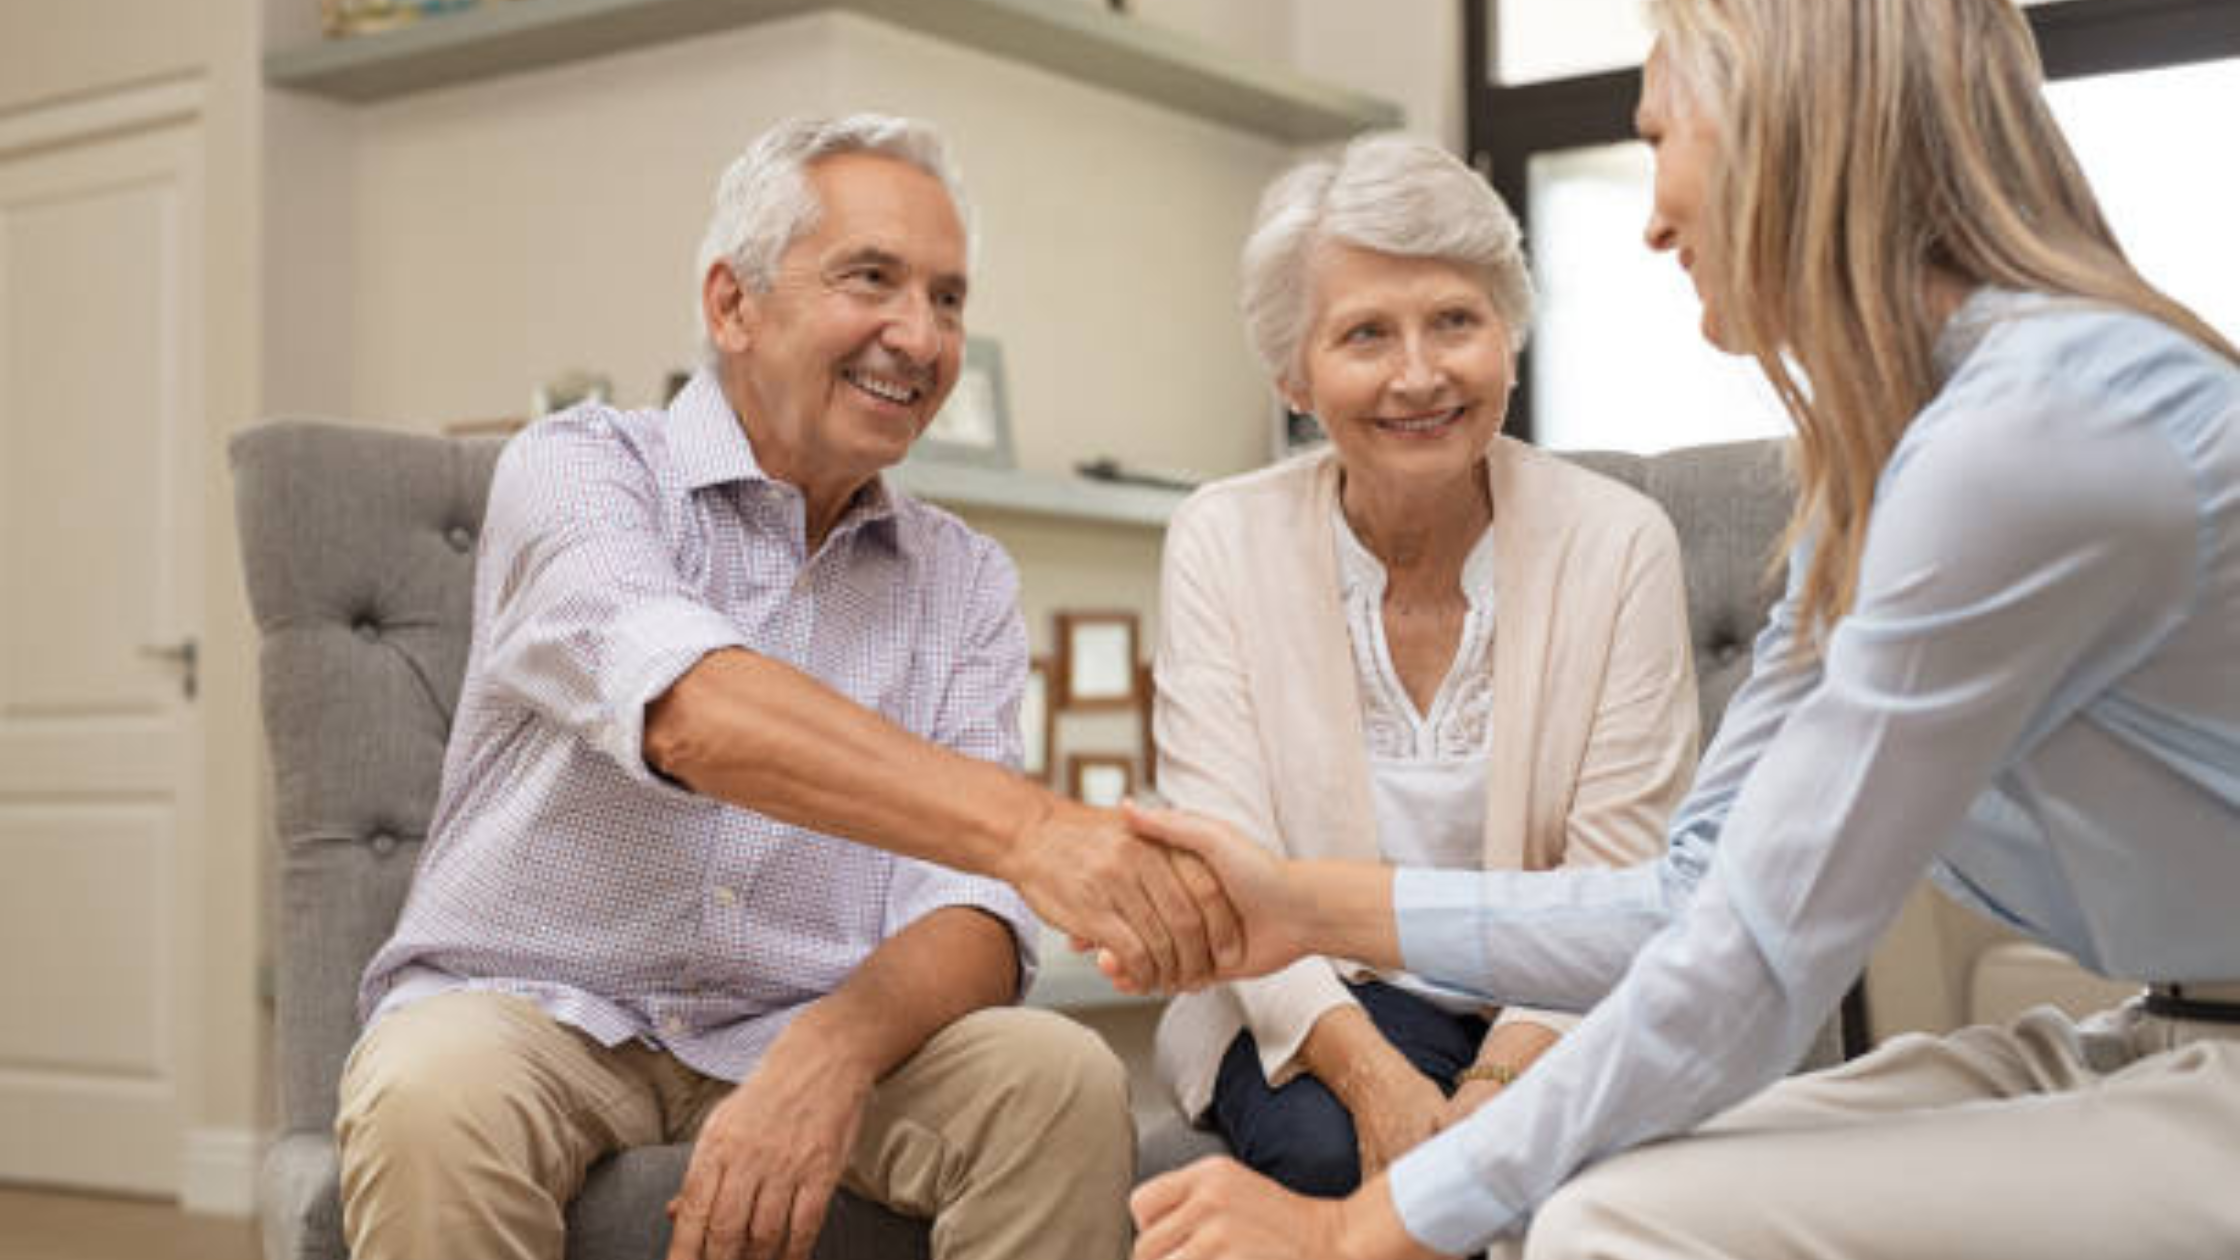 An elderly couple discusses their healthcare and insurance needs with another woman stock image